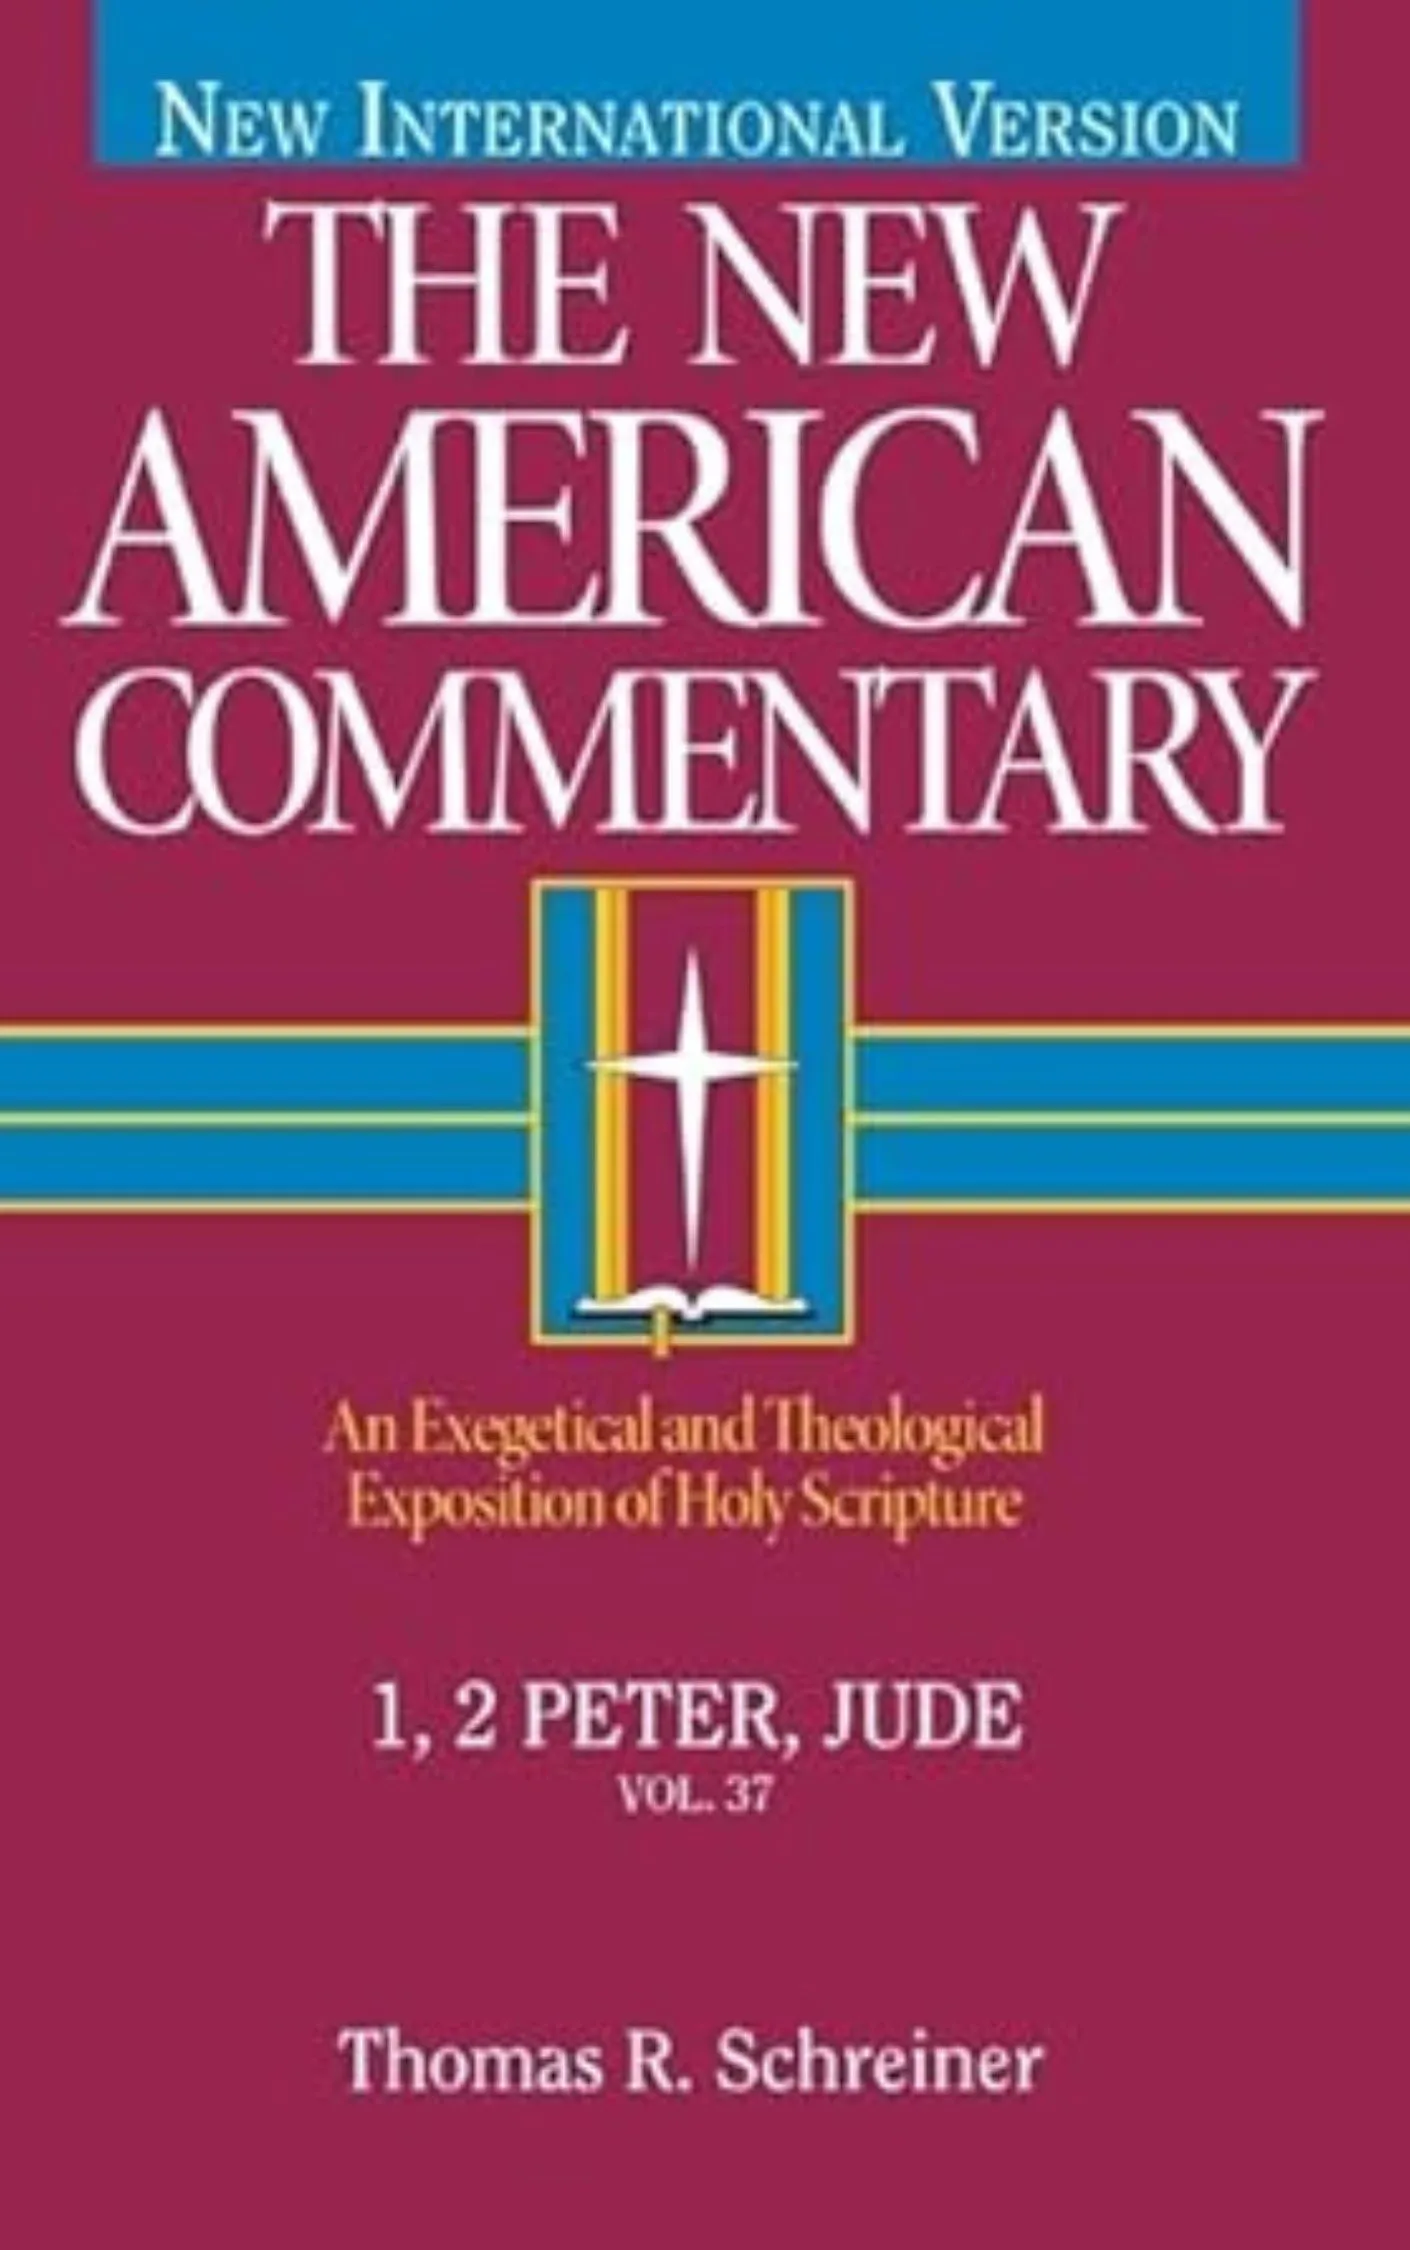 The New American Commentary: 1, 2 Peter, Jude by Thomas Schreiner